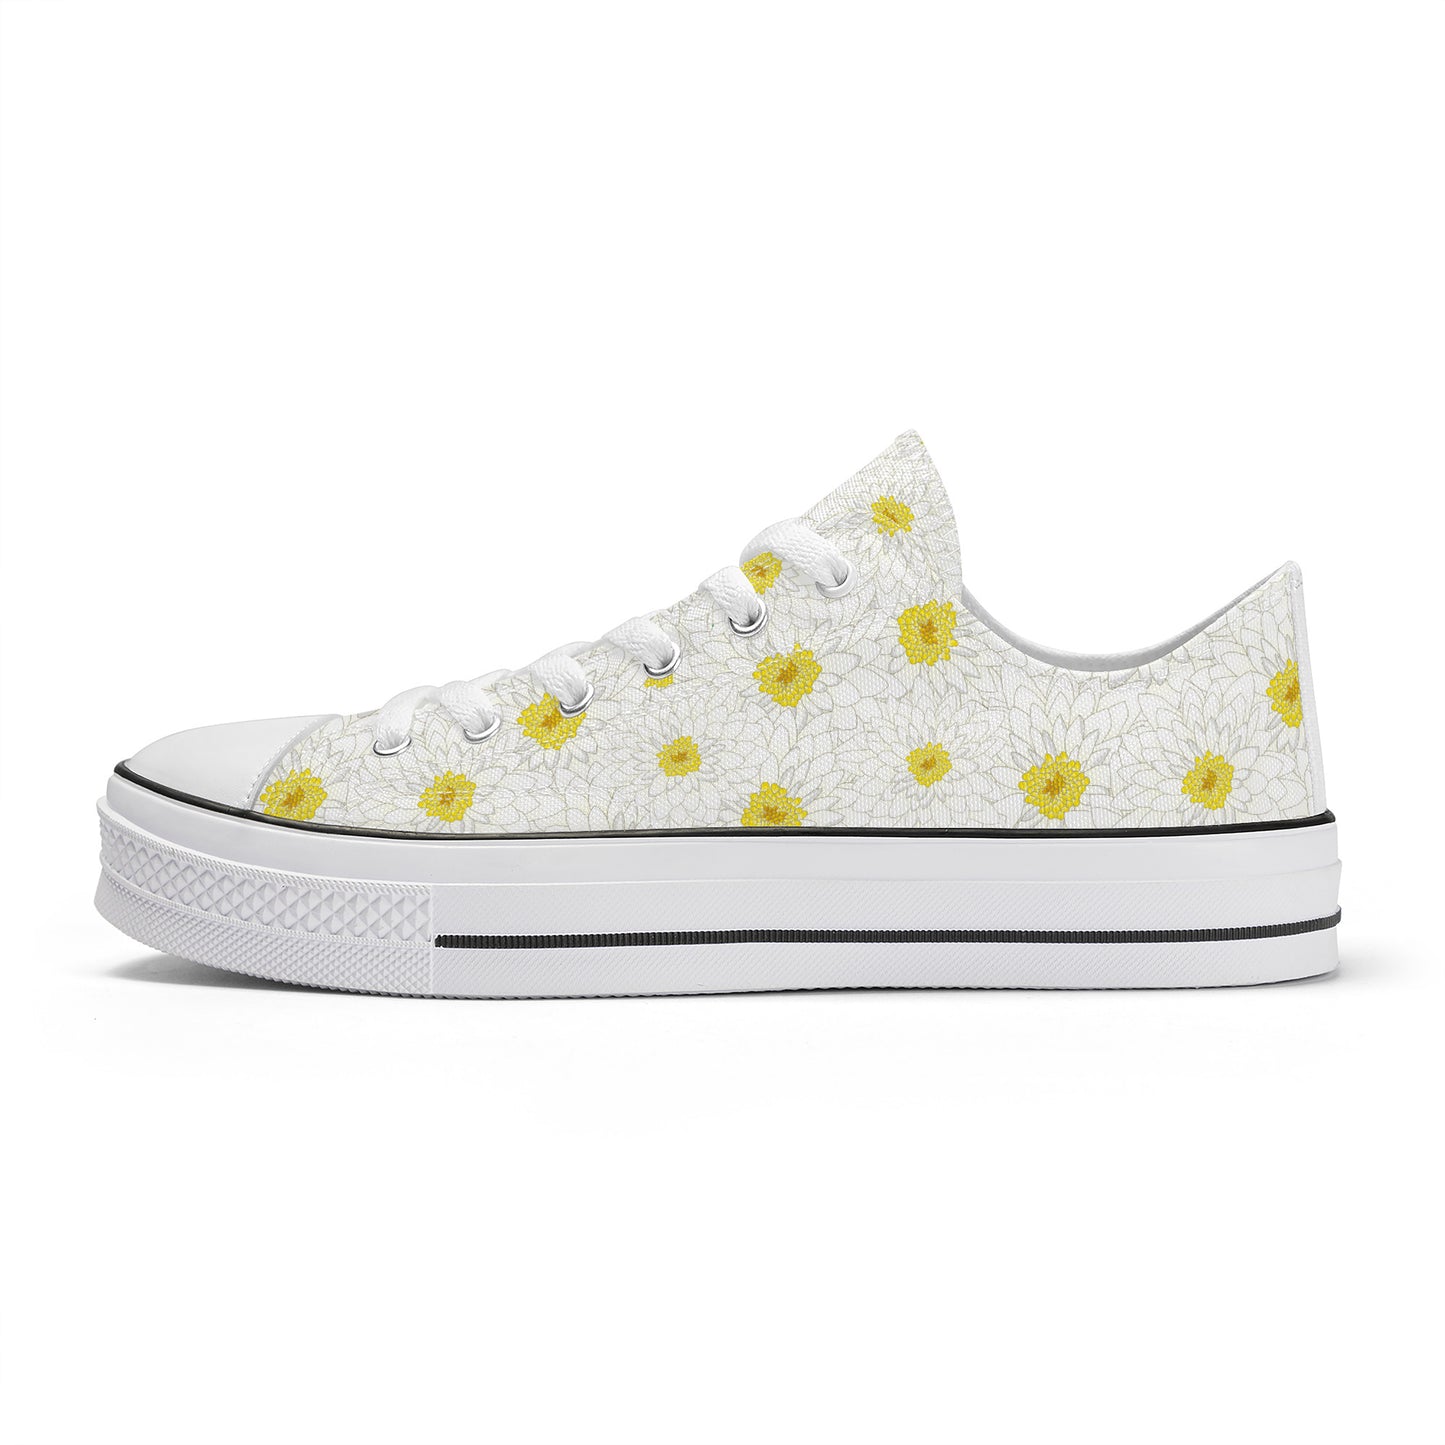 White Daisy Low Top Canvas Converse Style Shoes